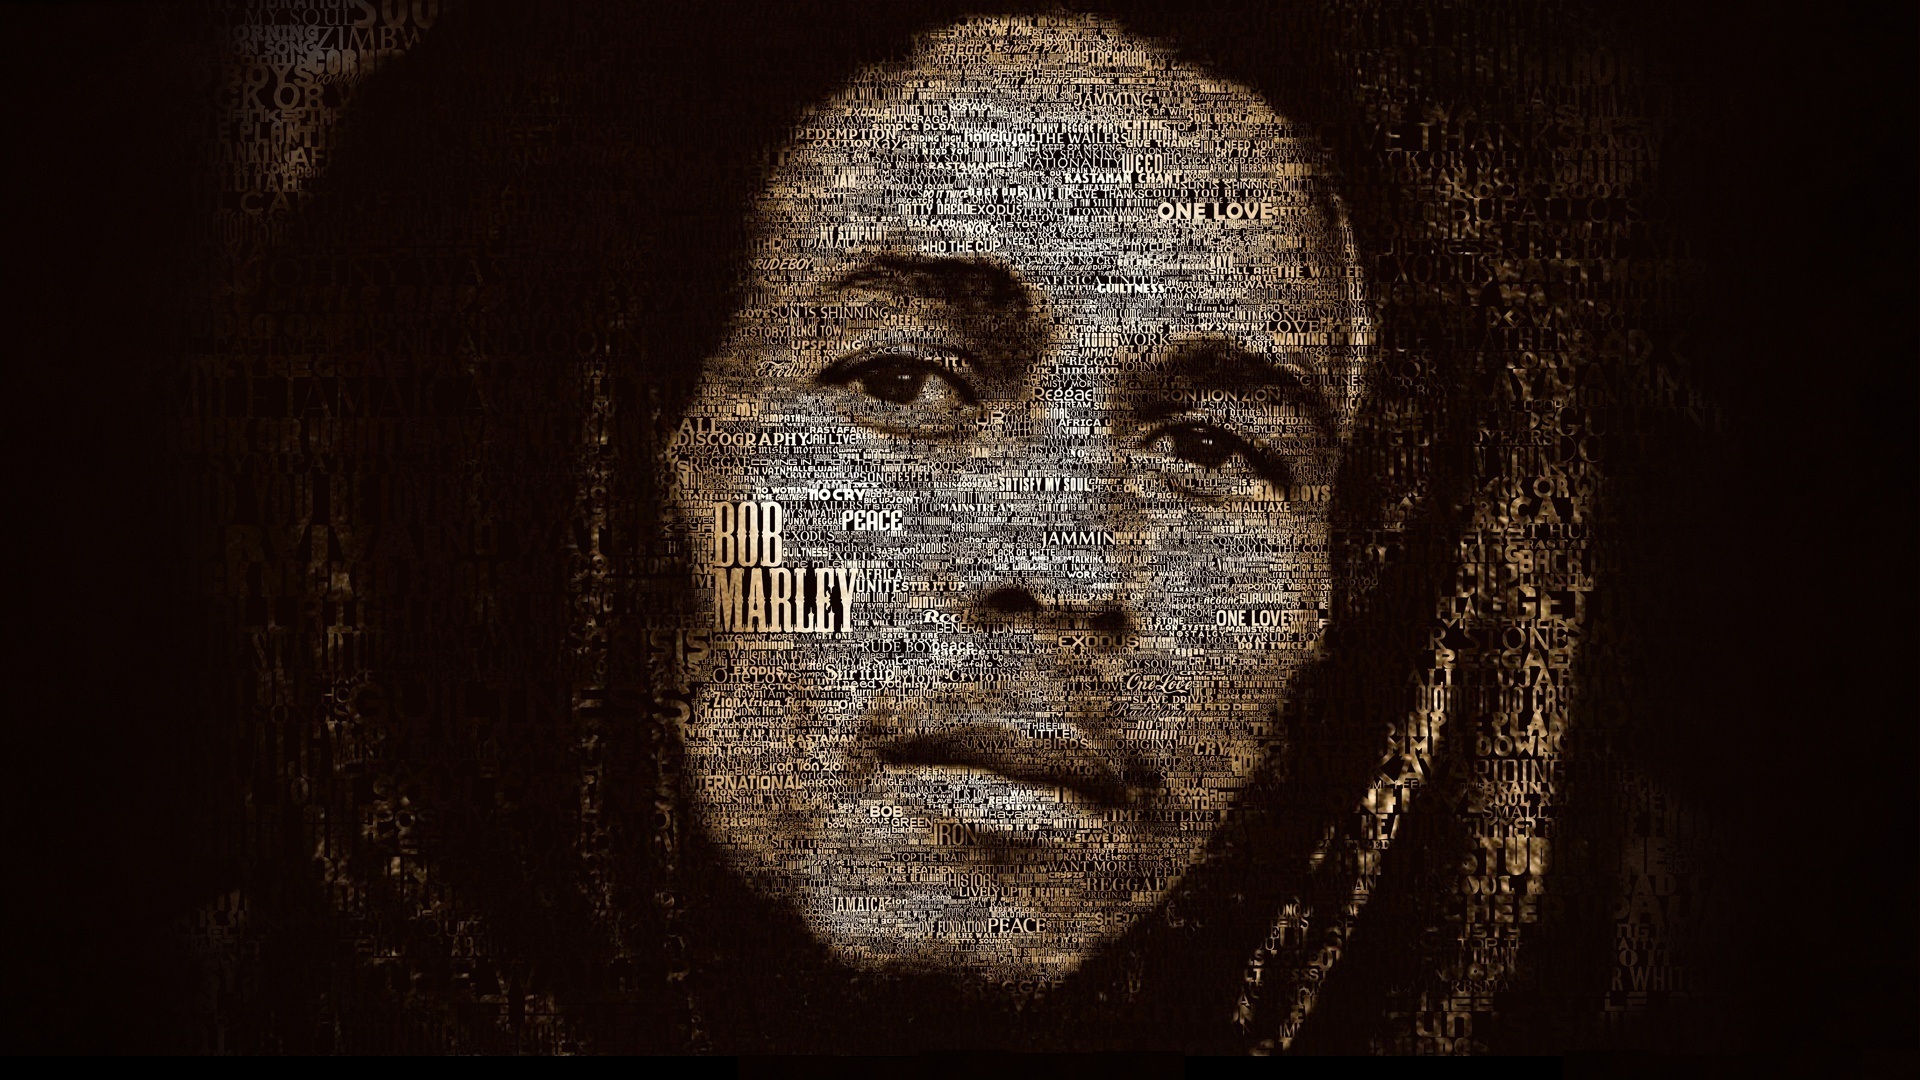 Bob Marley Wallpapers, Pictures, Images